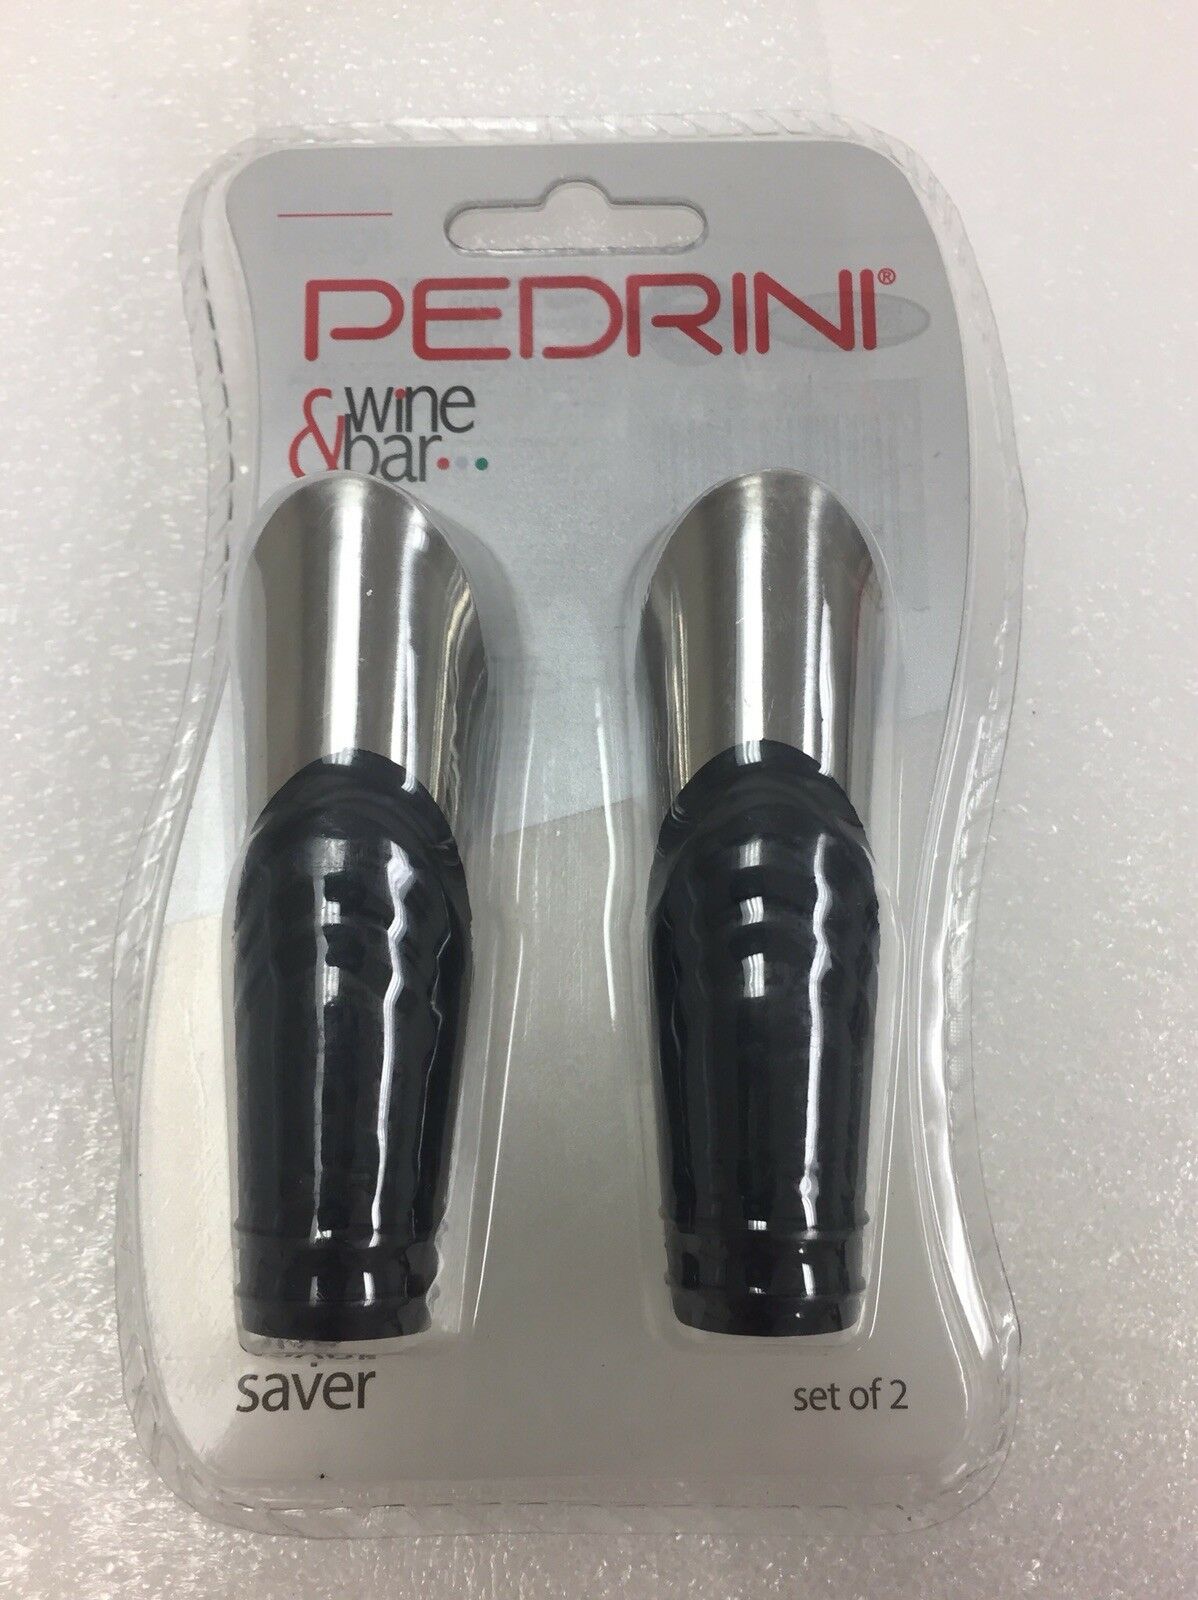 Pedrini: Wine Pourer - Drip Saver 2 Pack - New In Package Home Kitchen Bar Drink